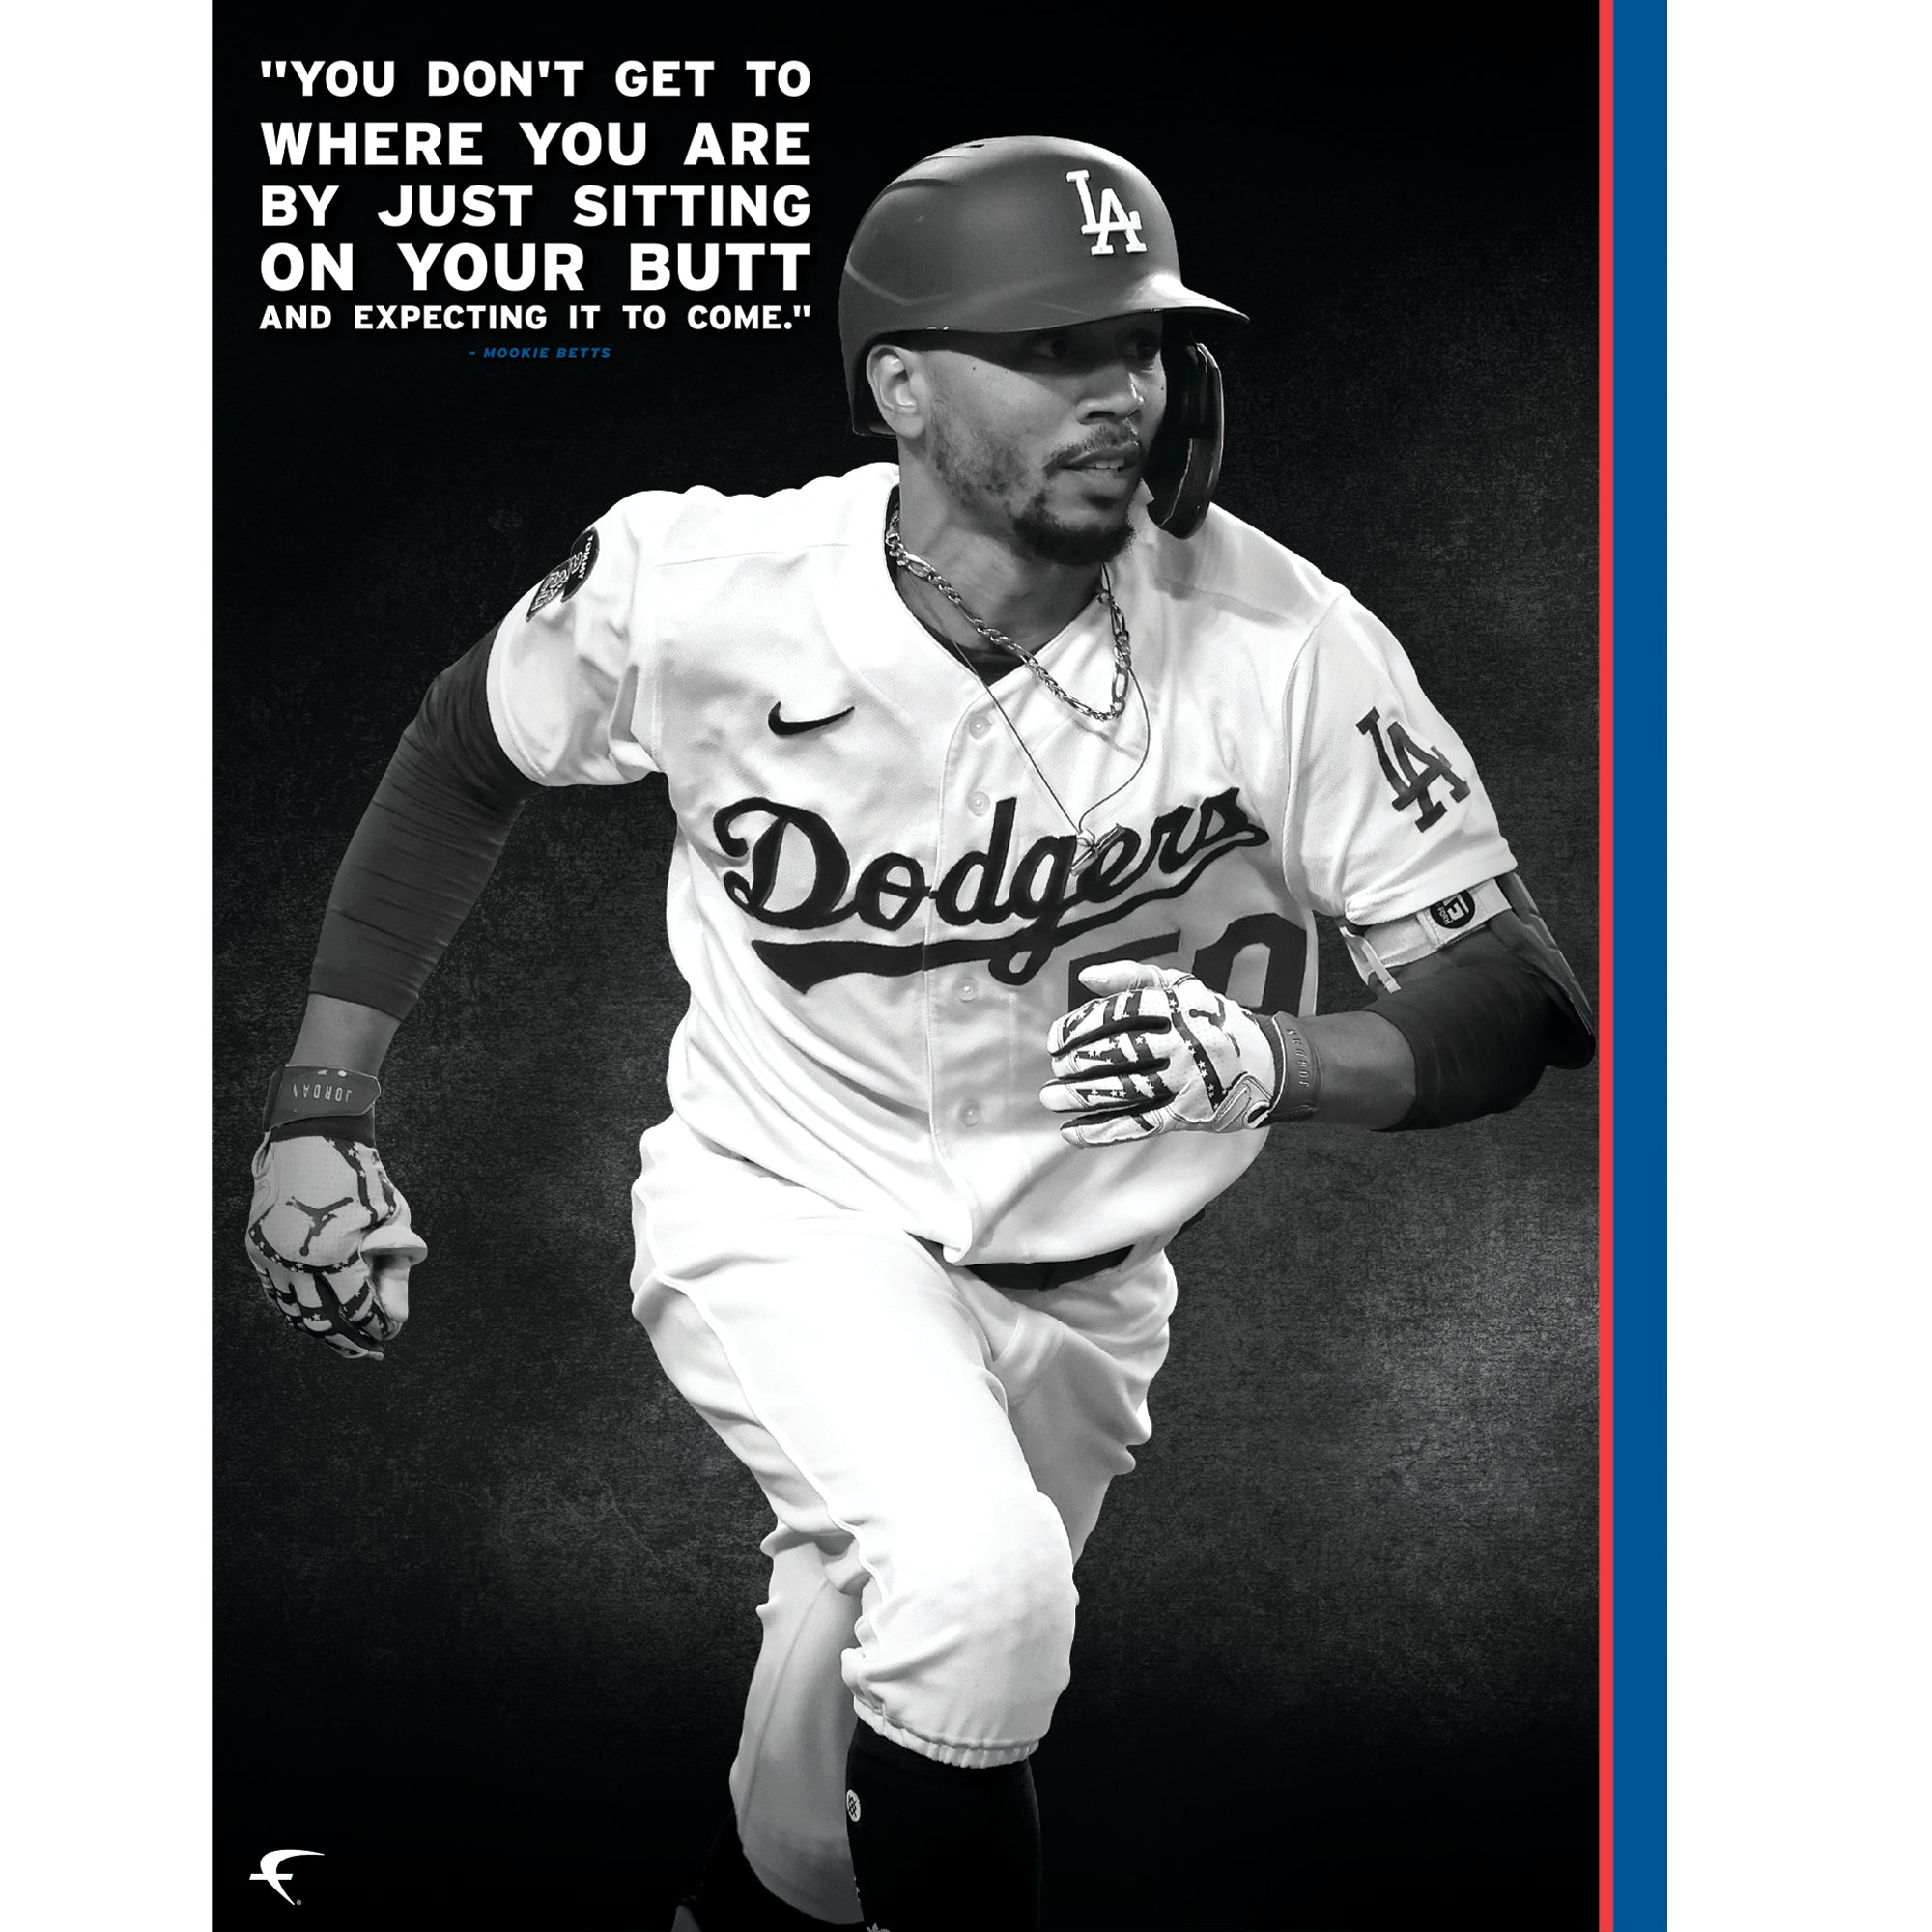 Los Angeles Dodgers: Mookie Betts 2022 Inspirational Poster - Official